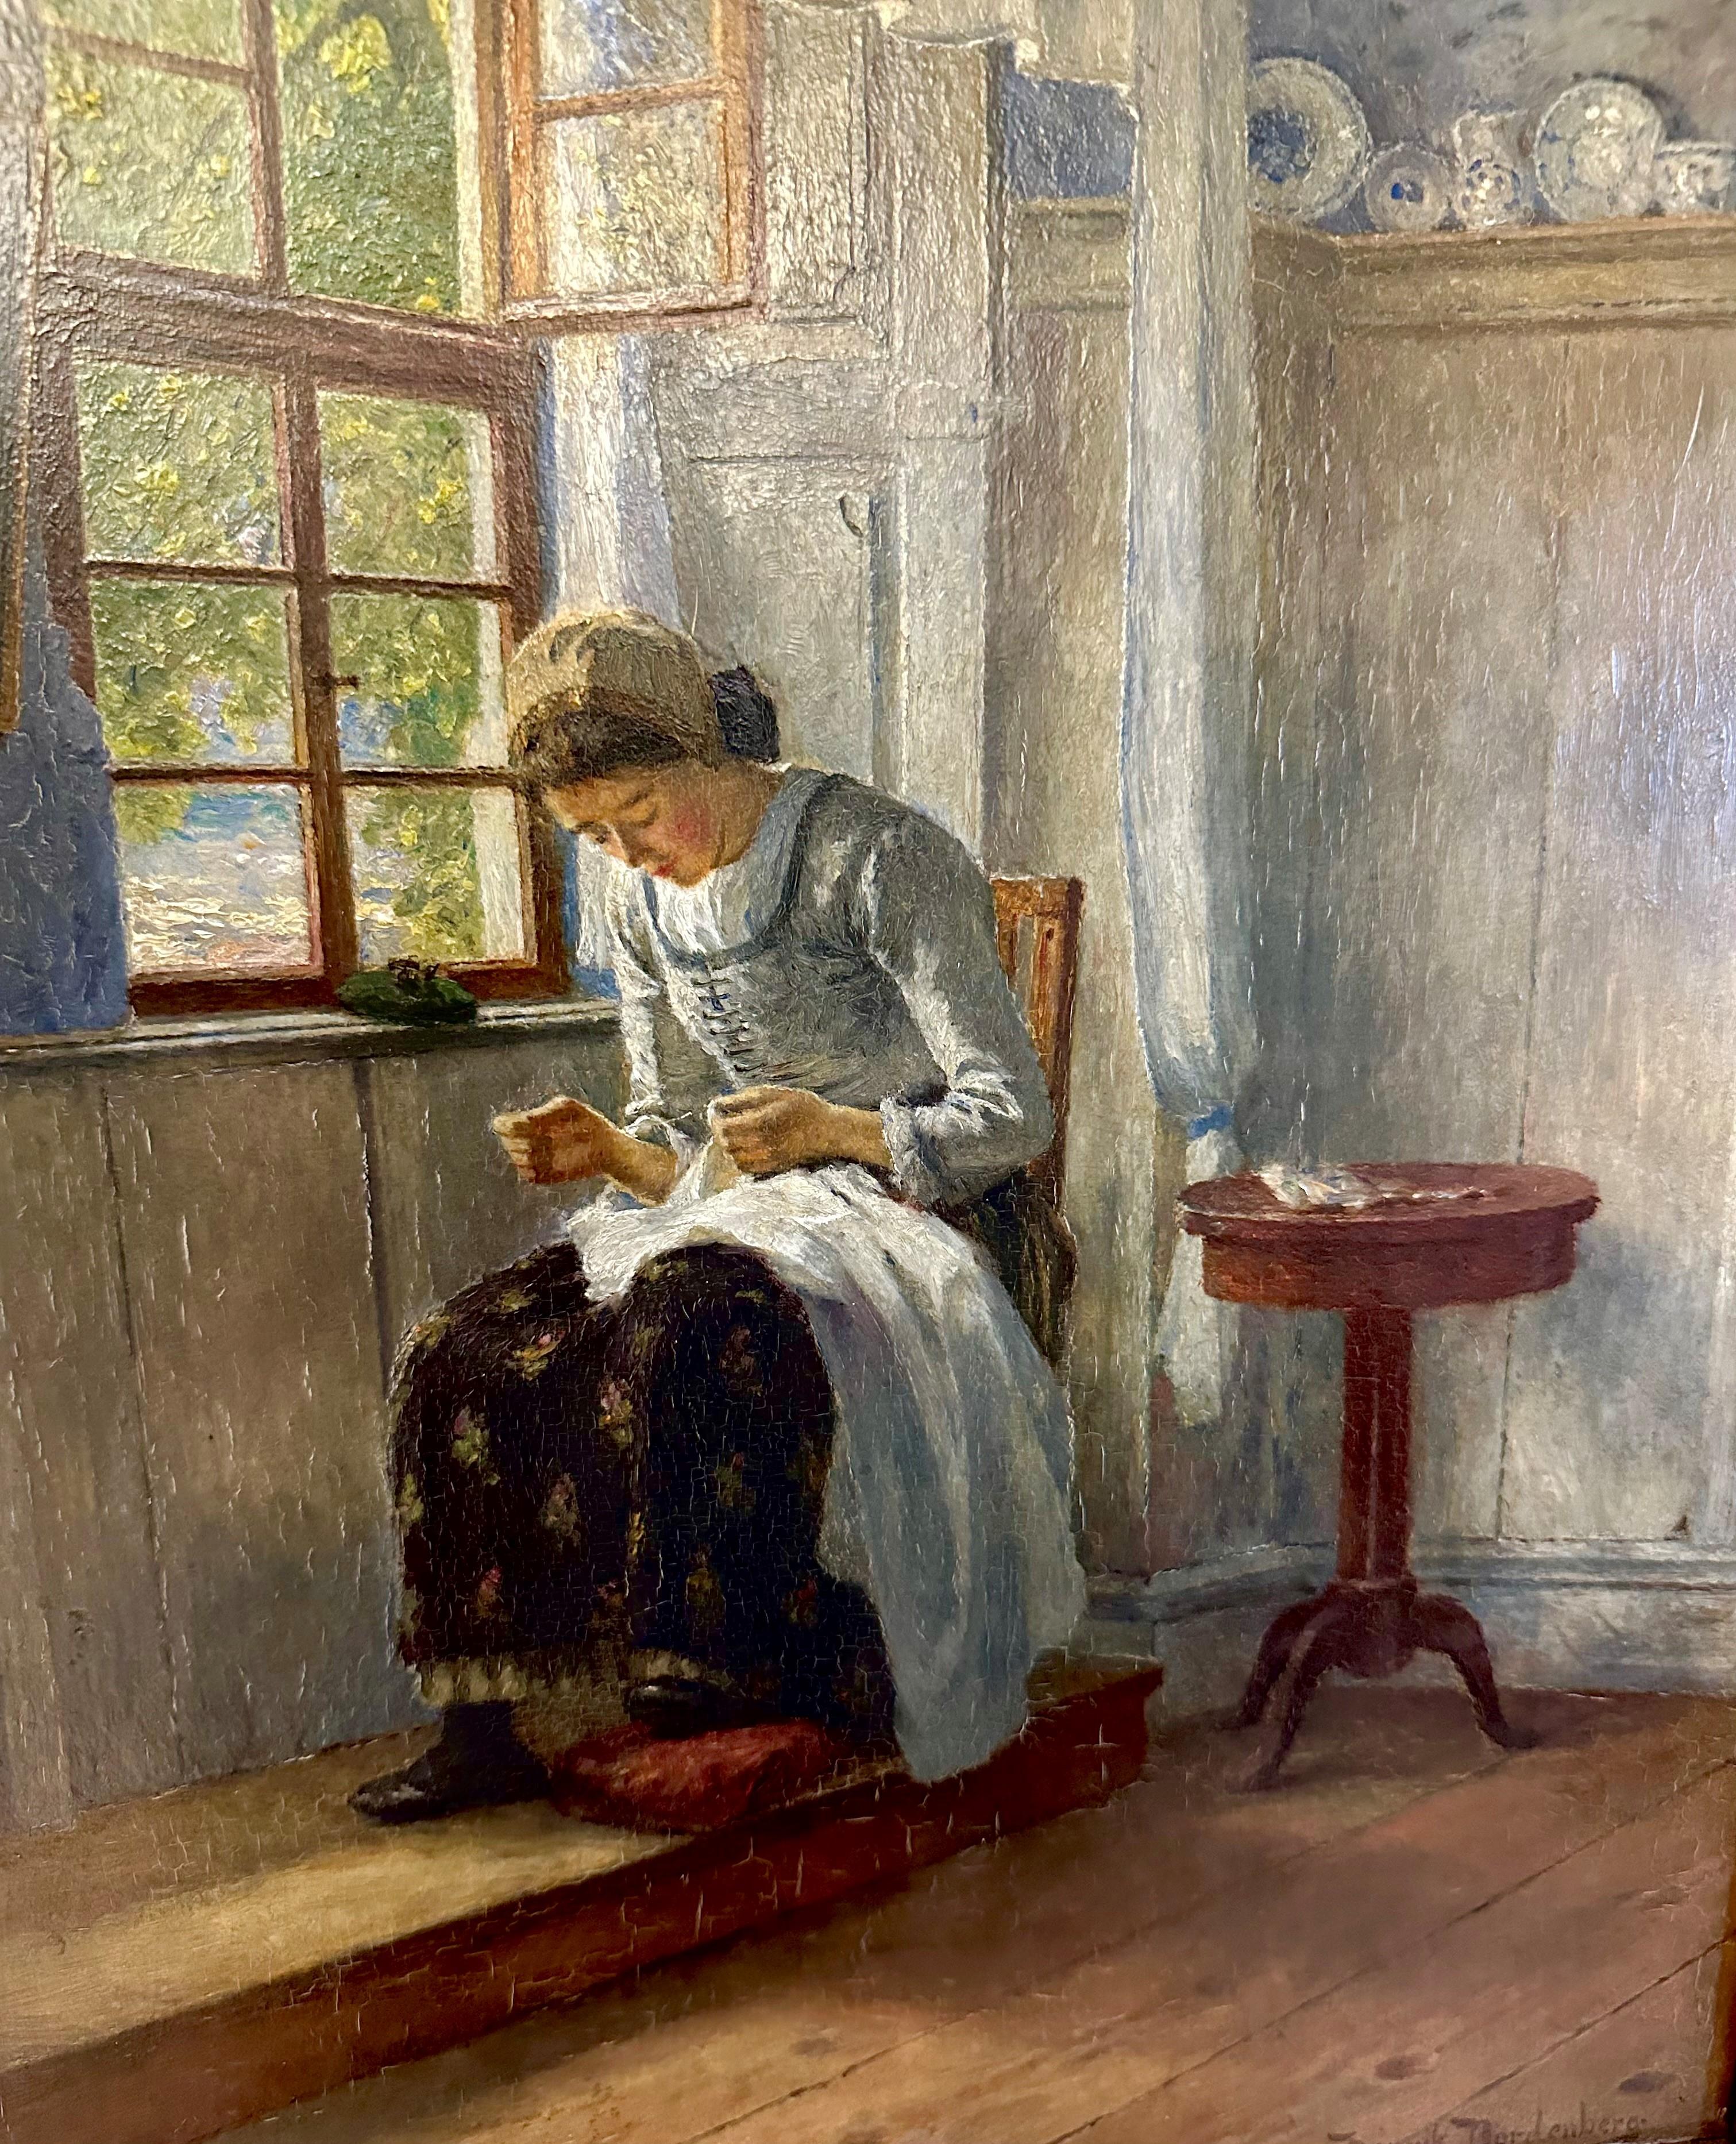 Sewing woman - Painting by Henrik Nordenberg